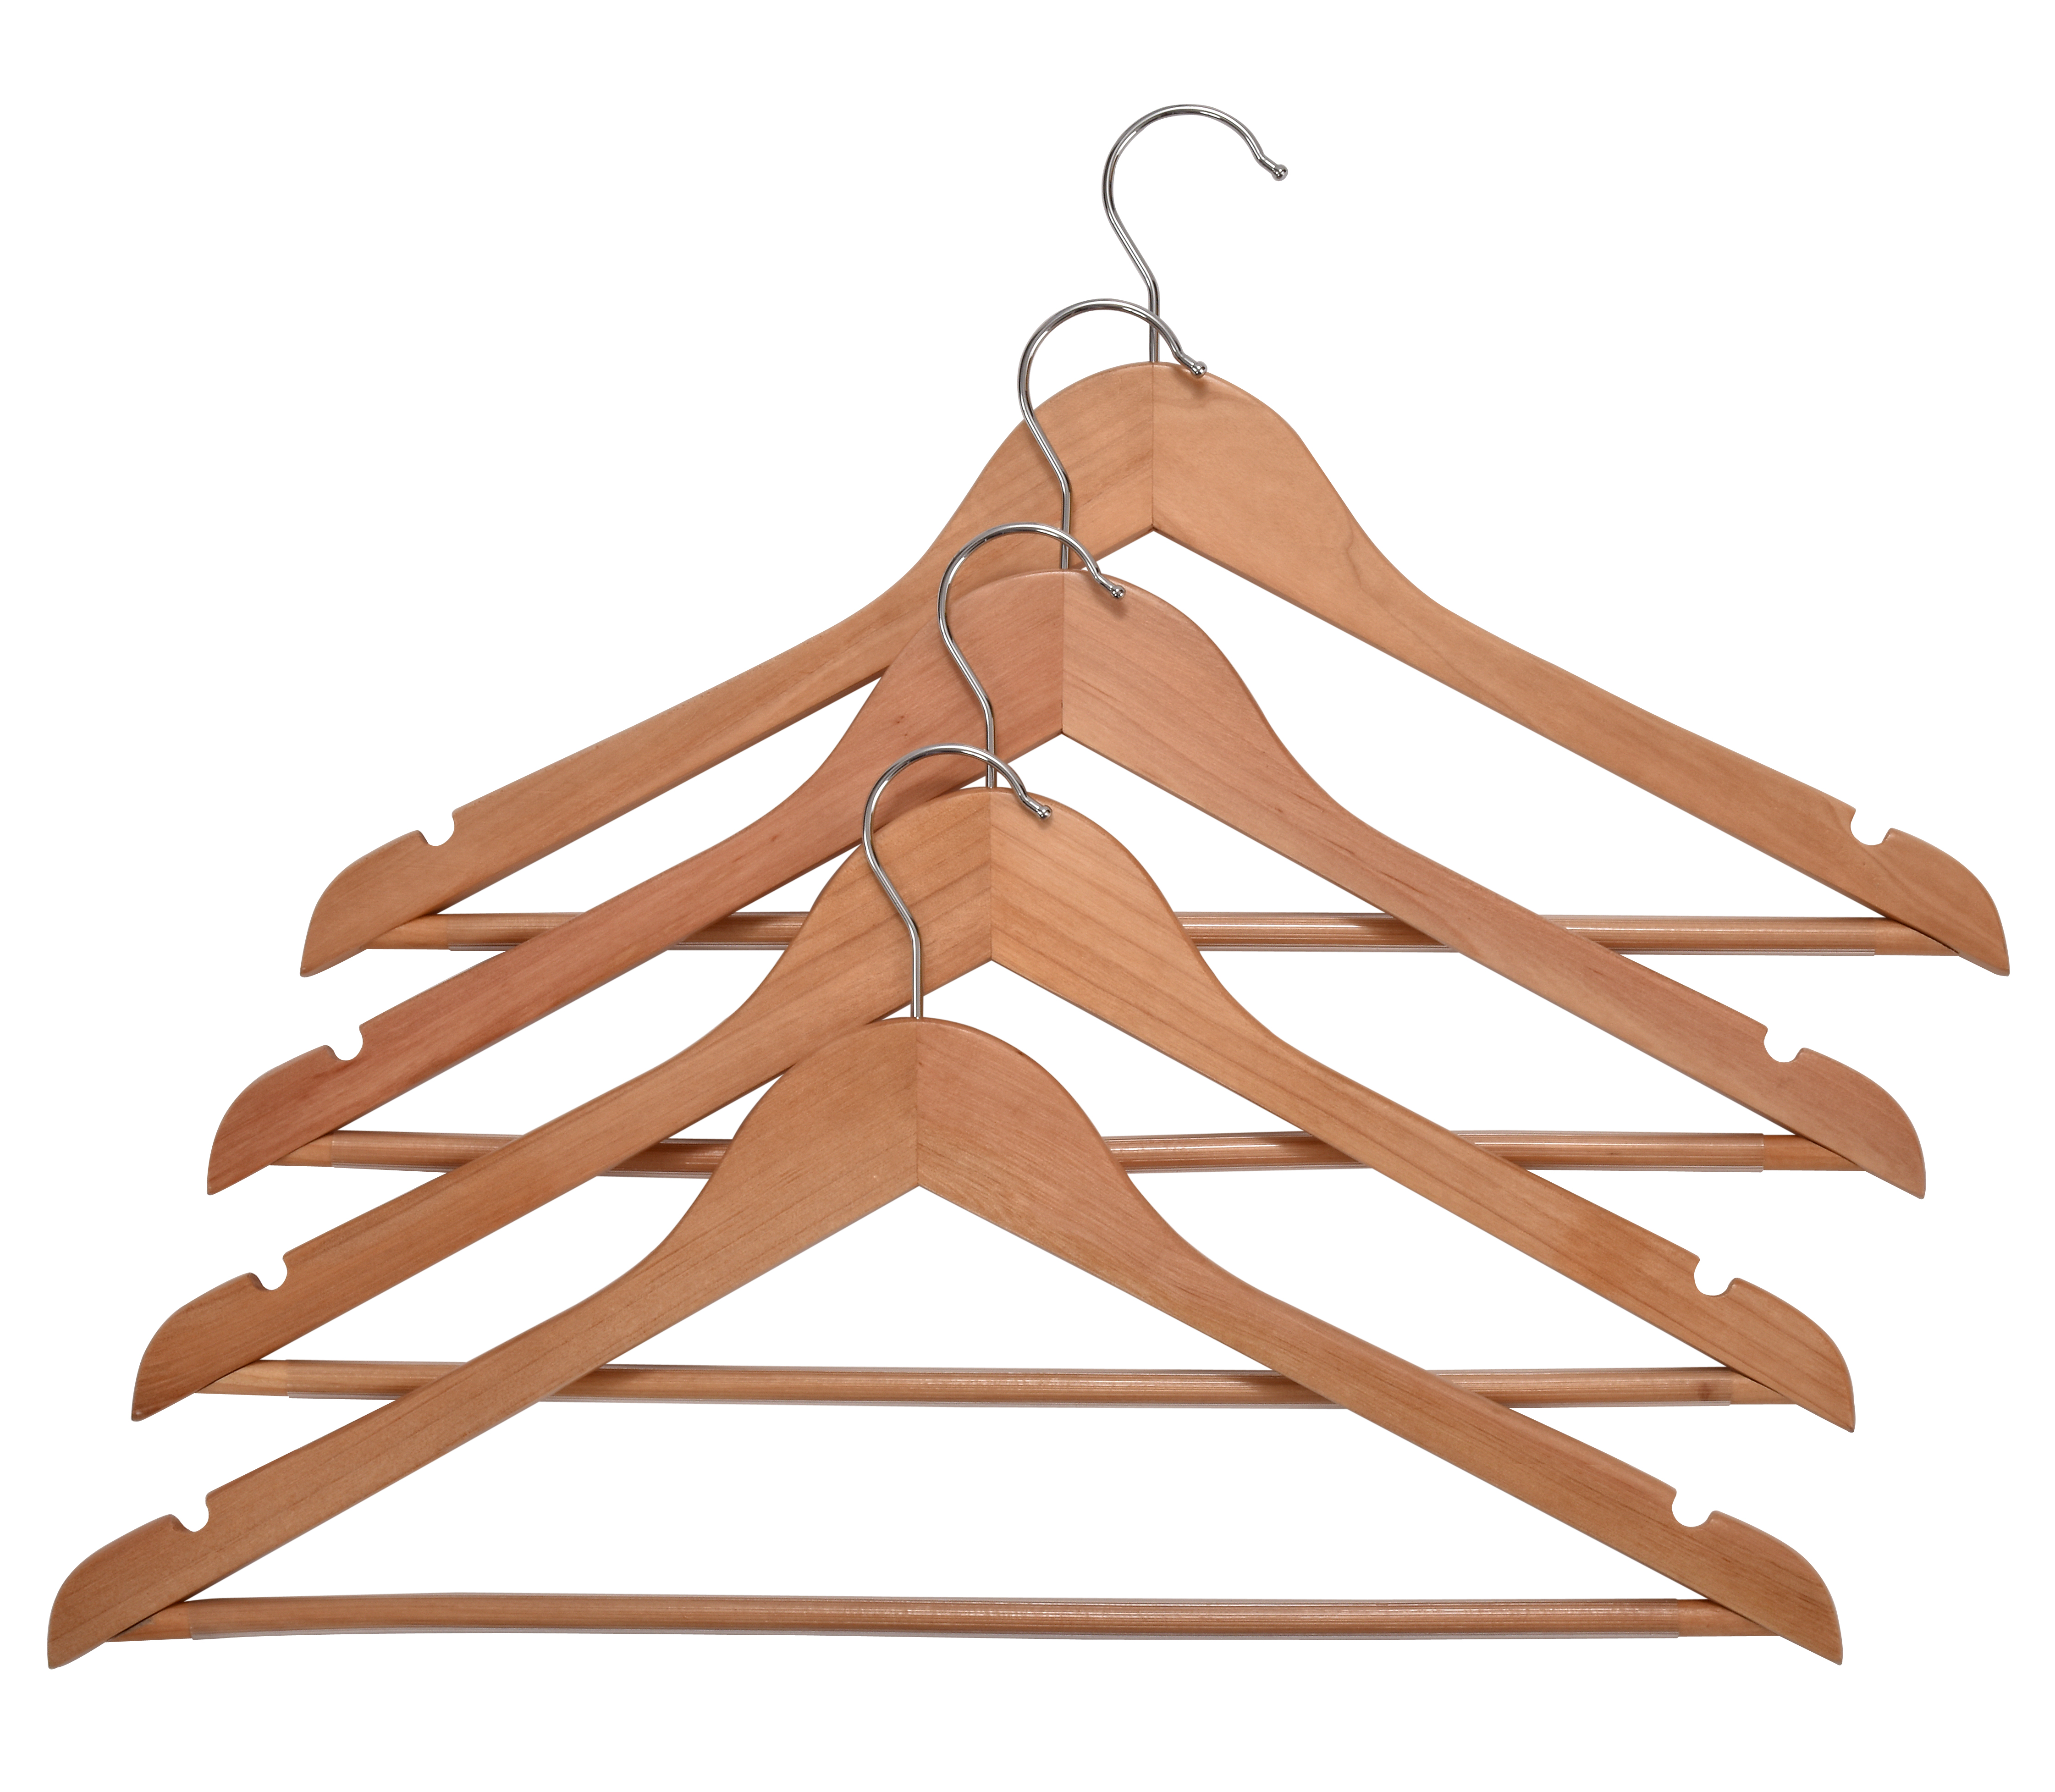 Wood Suit Hangers - 30 Pack, Natural - image 2 of 3